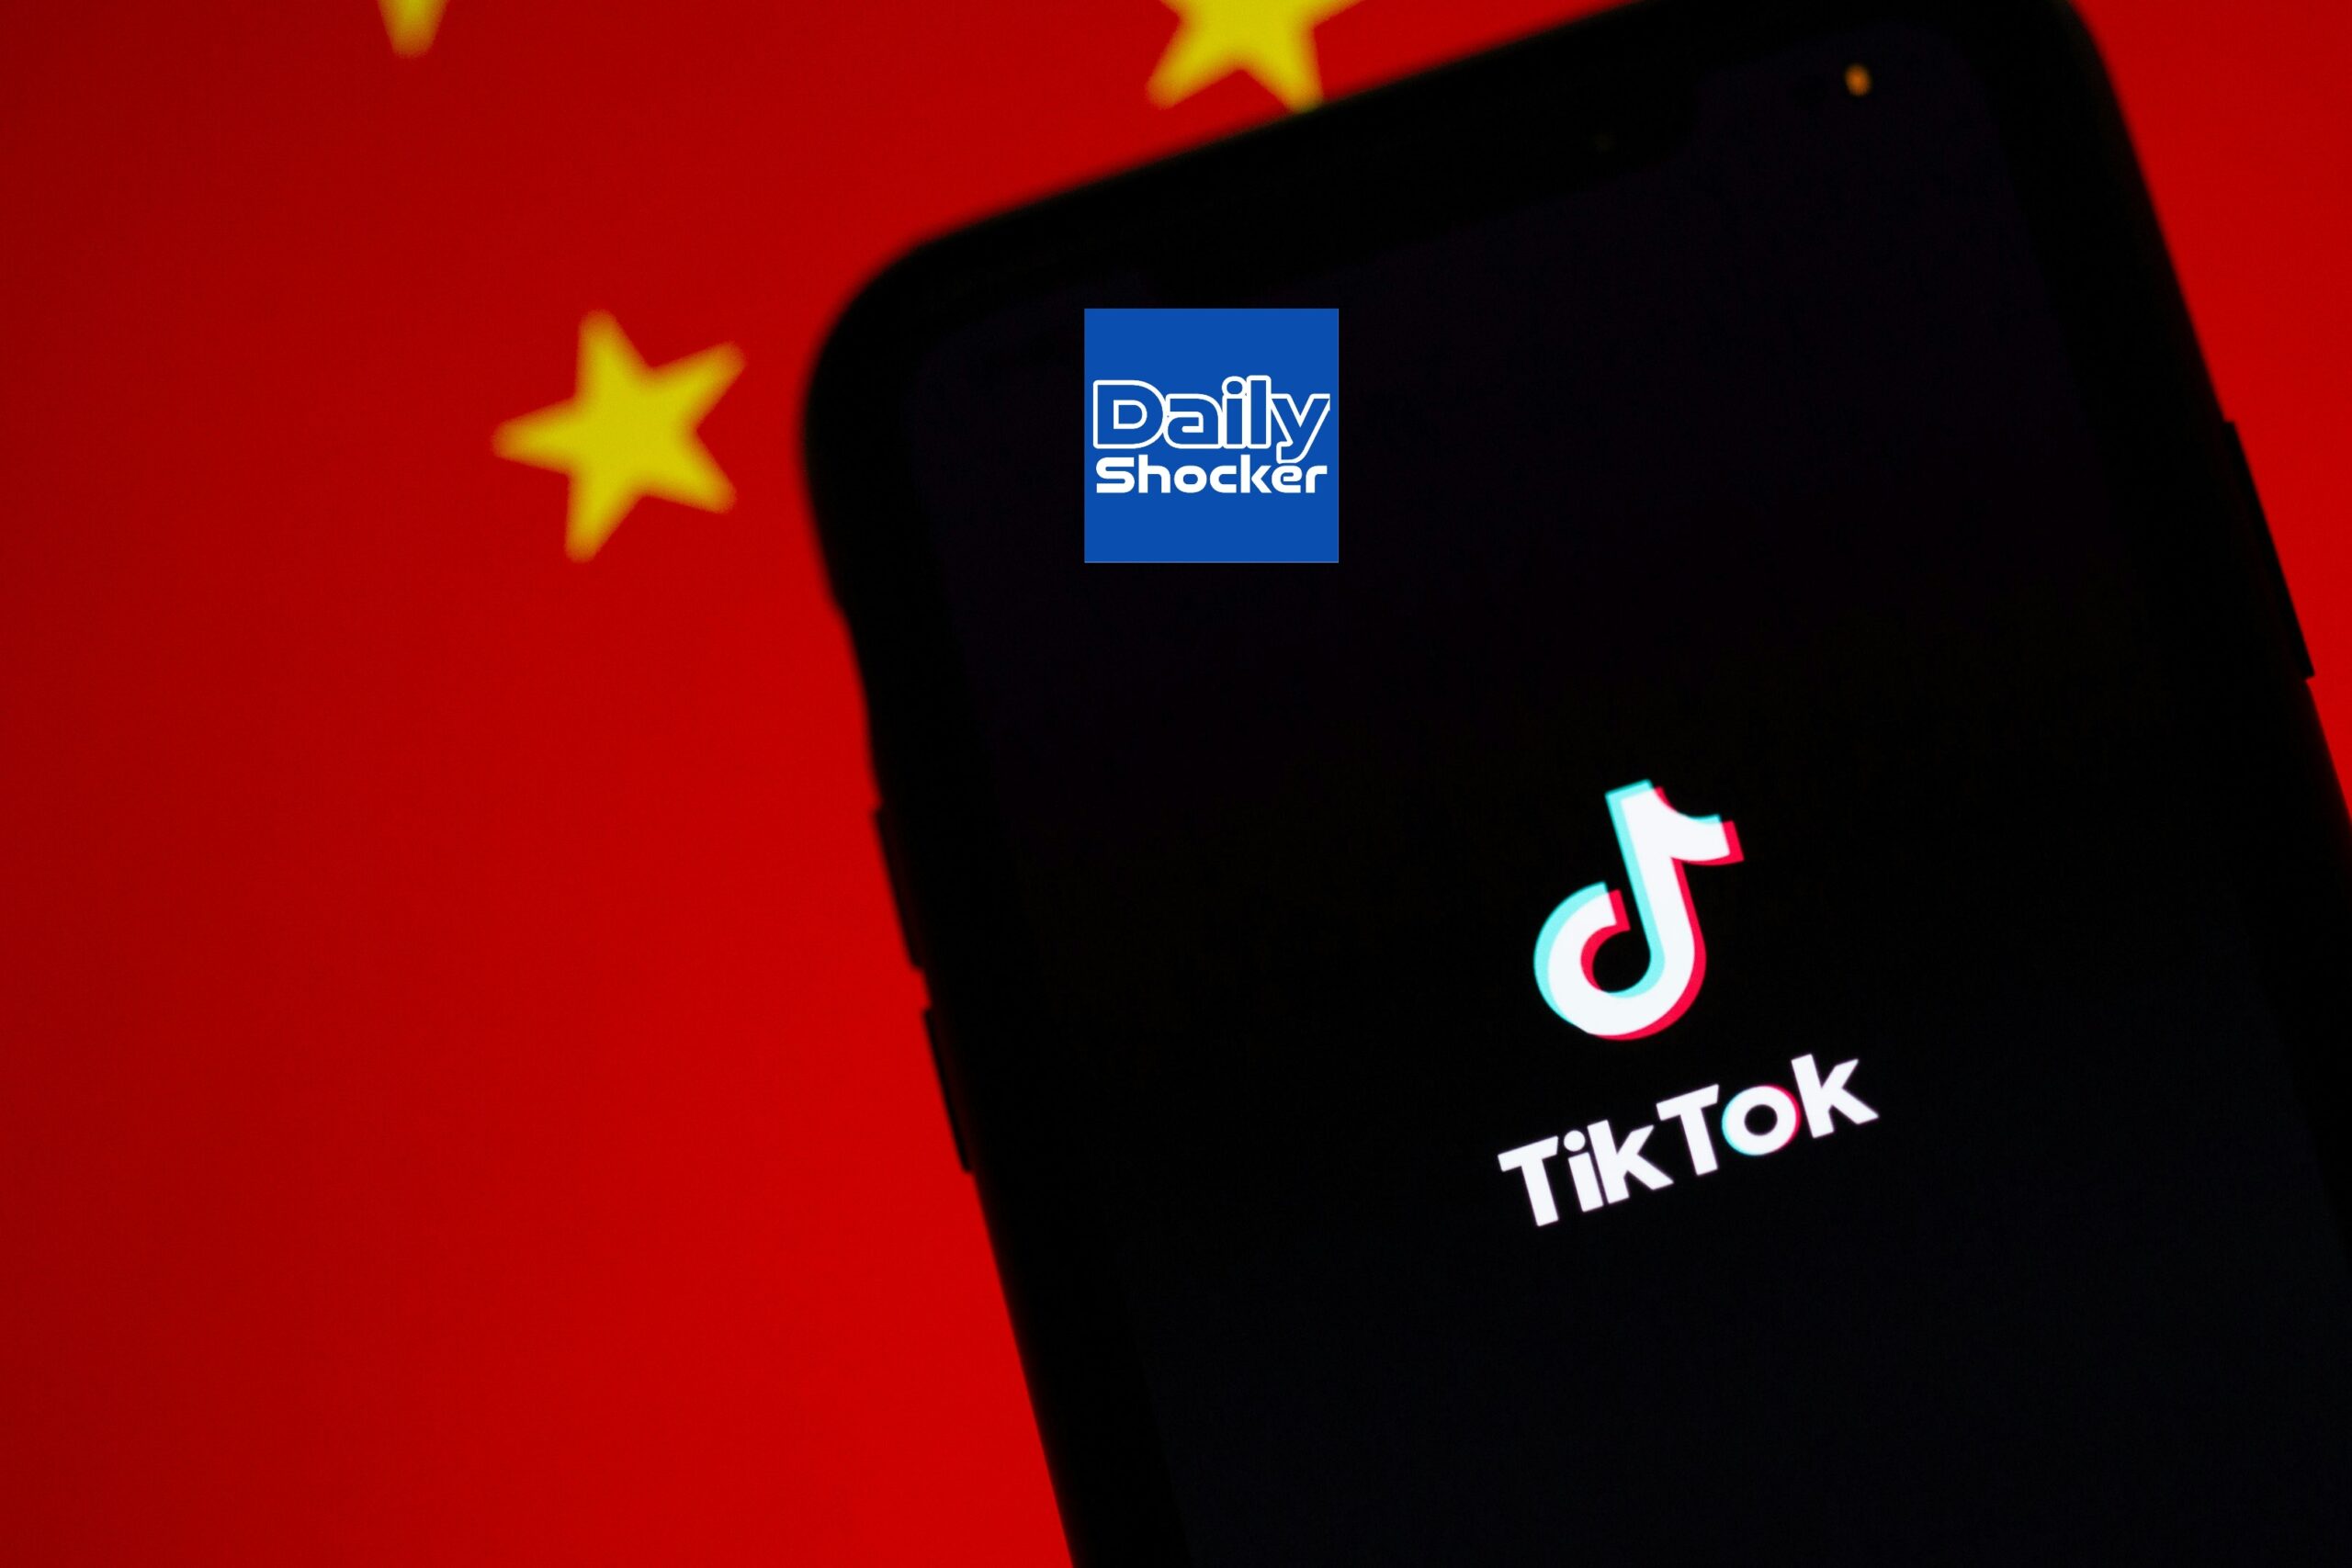 TikTok files lawsuit against U.S. Government, claims proposed ban violates First Amendment